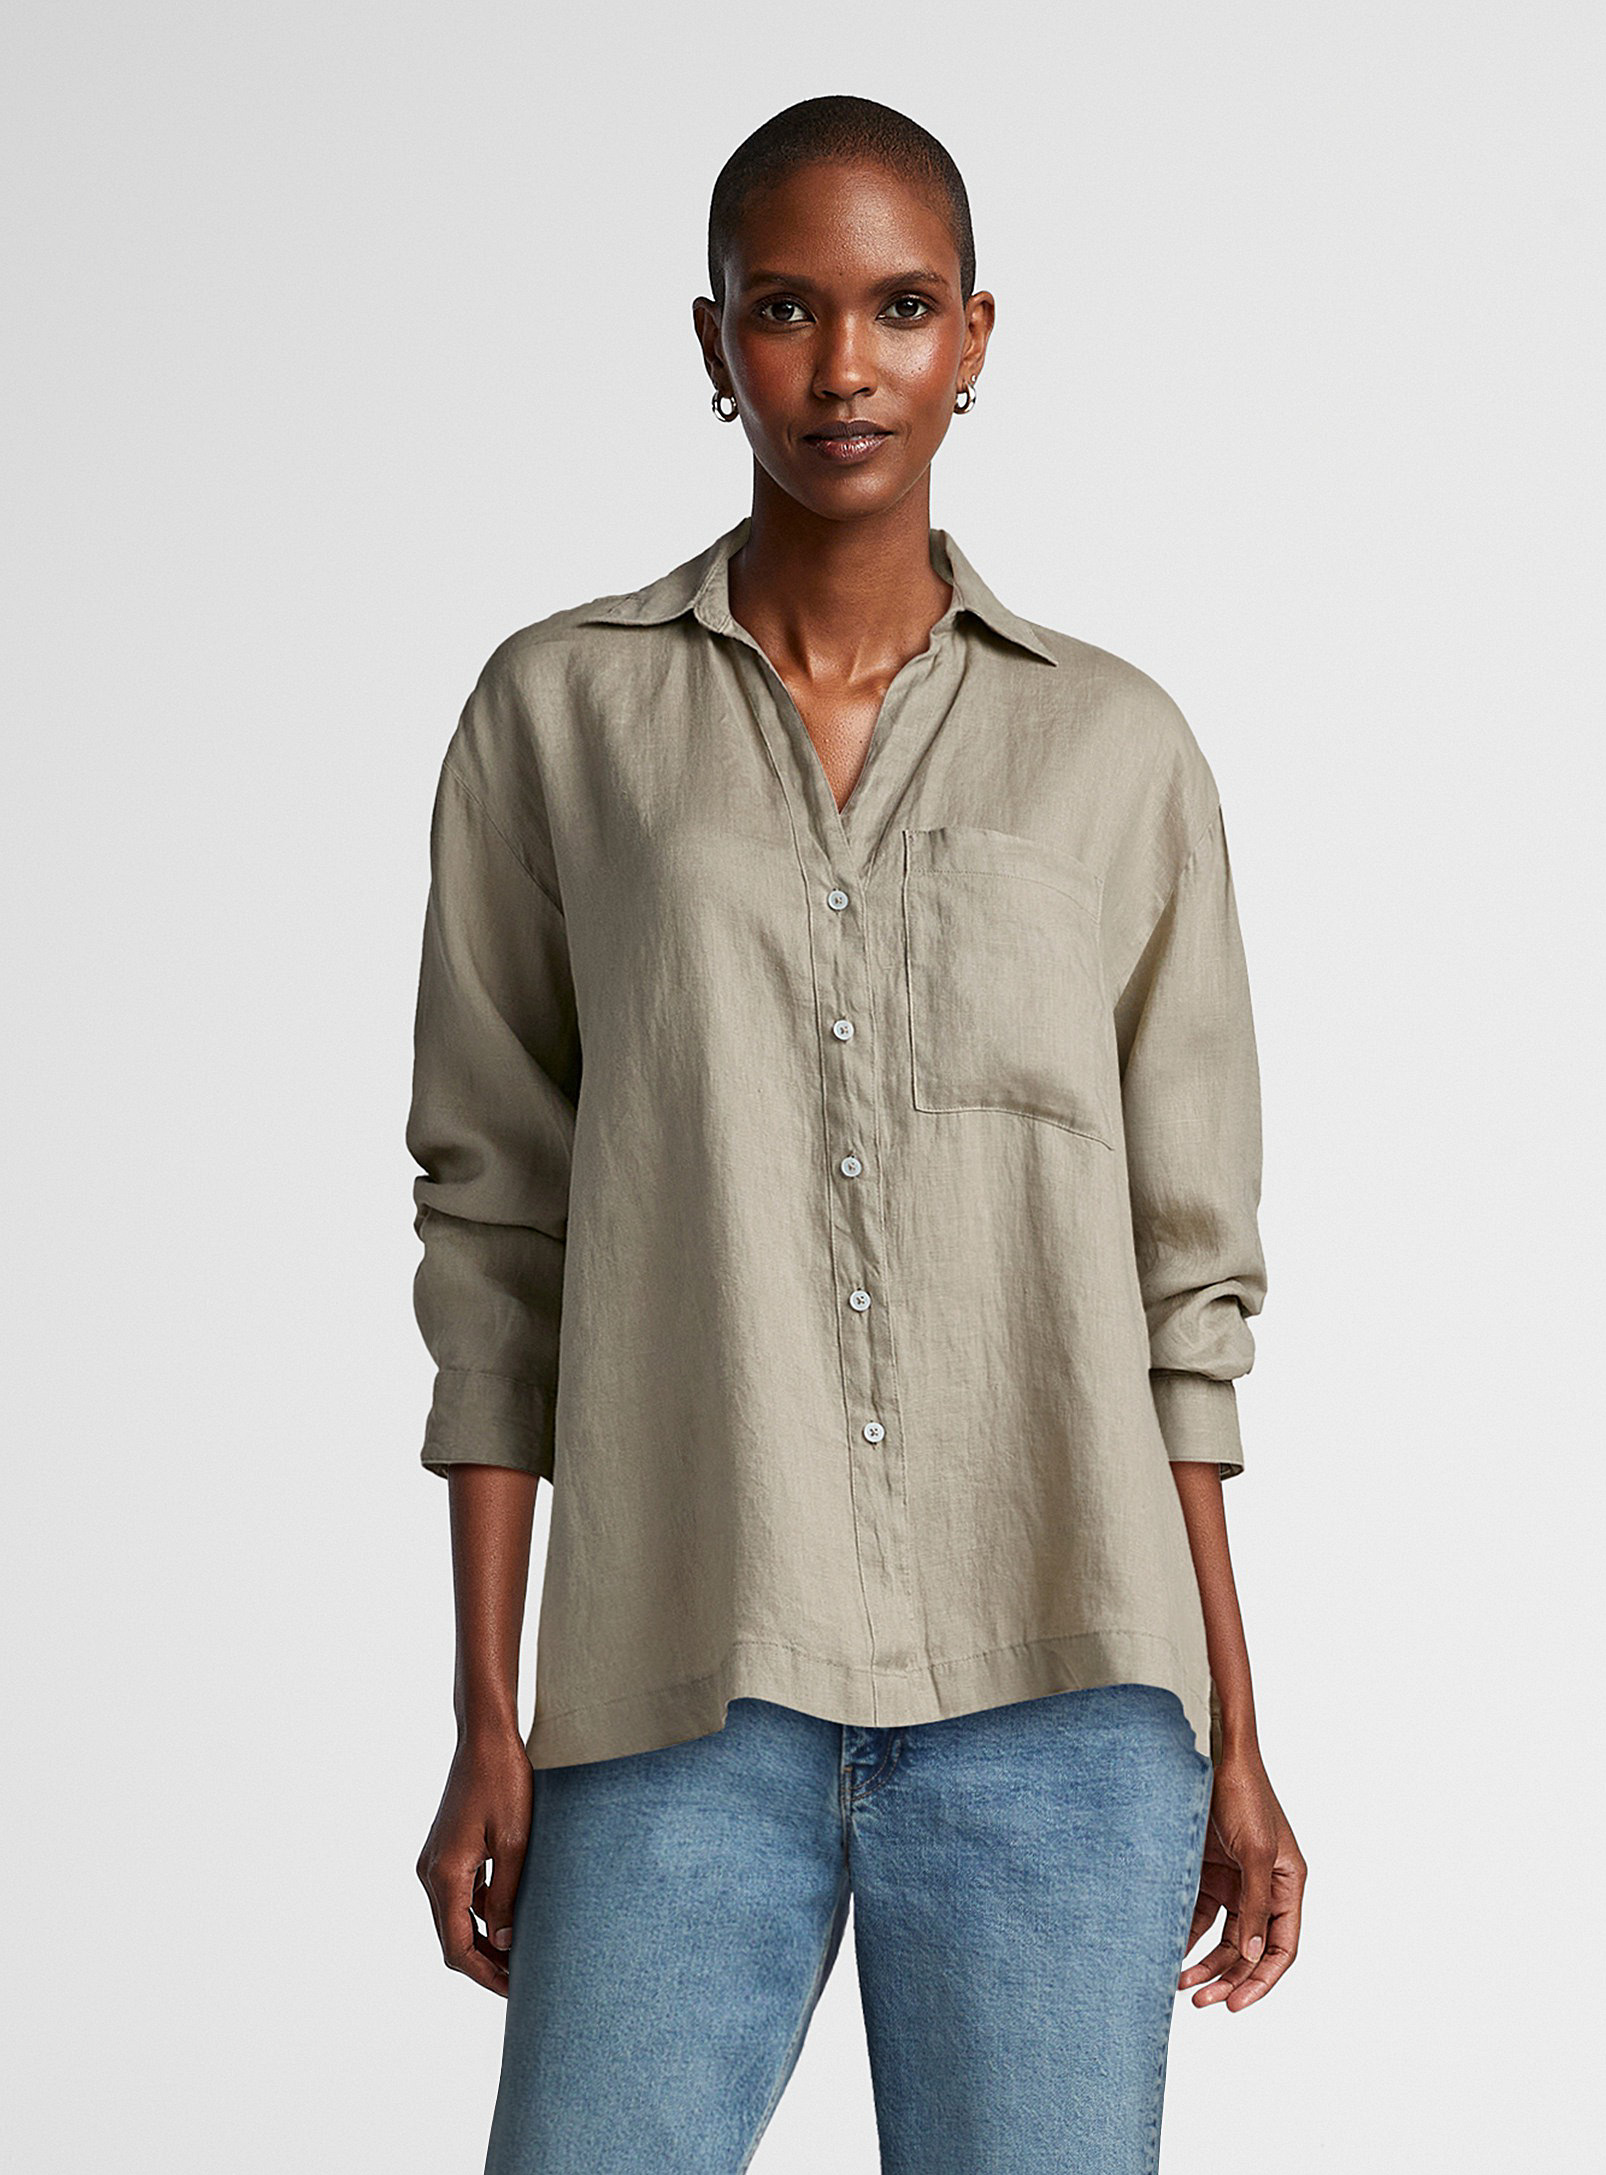 United Colors Of Benetton Patch Pocket Pure Linen Shirt In Khaki/sage/olive